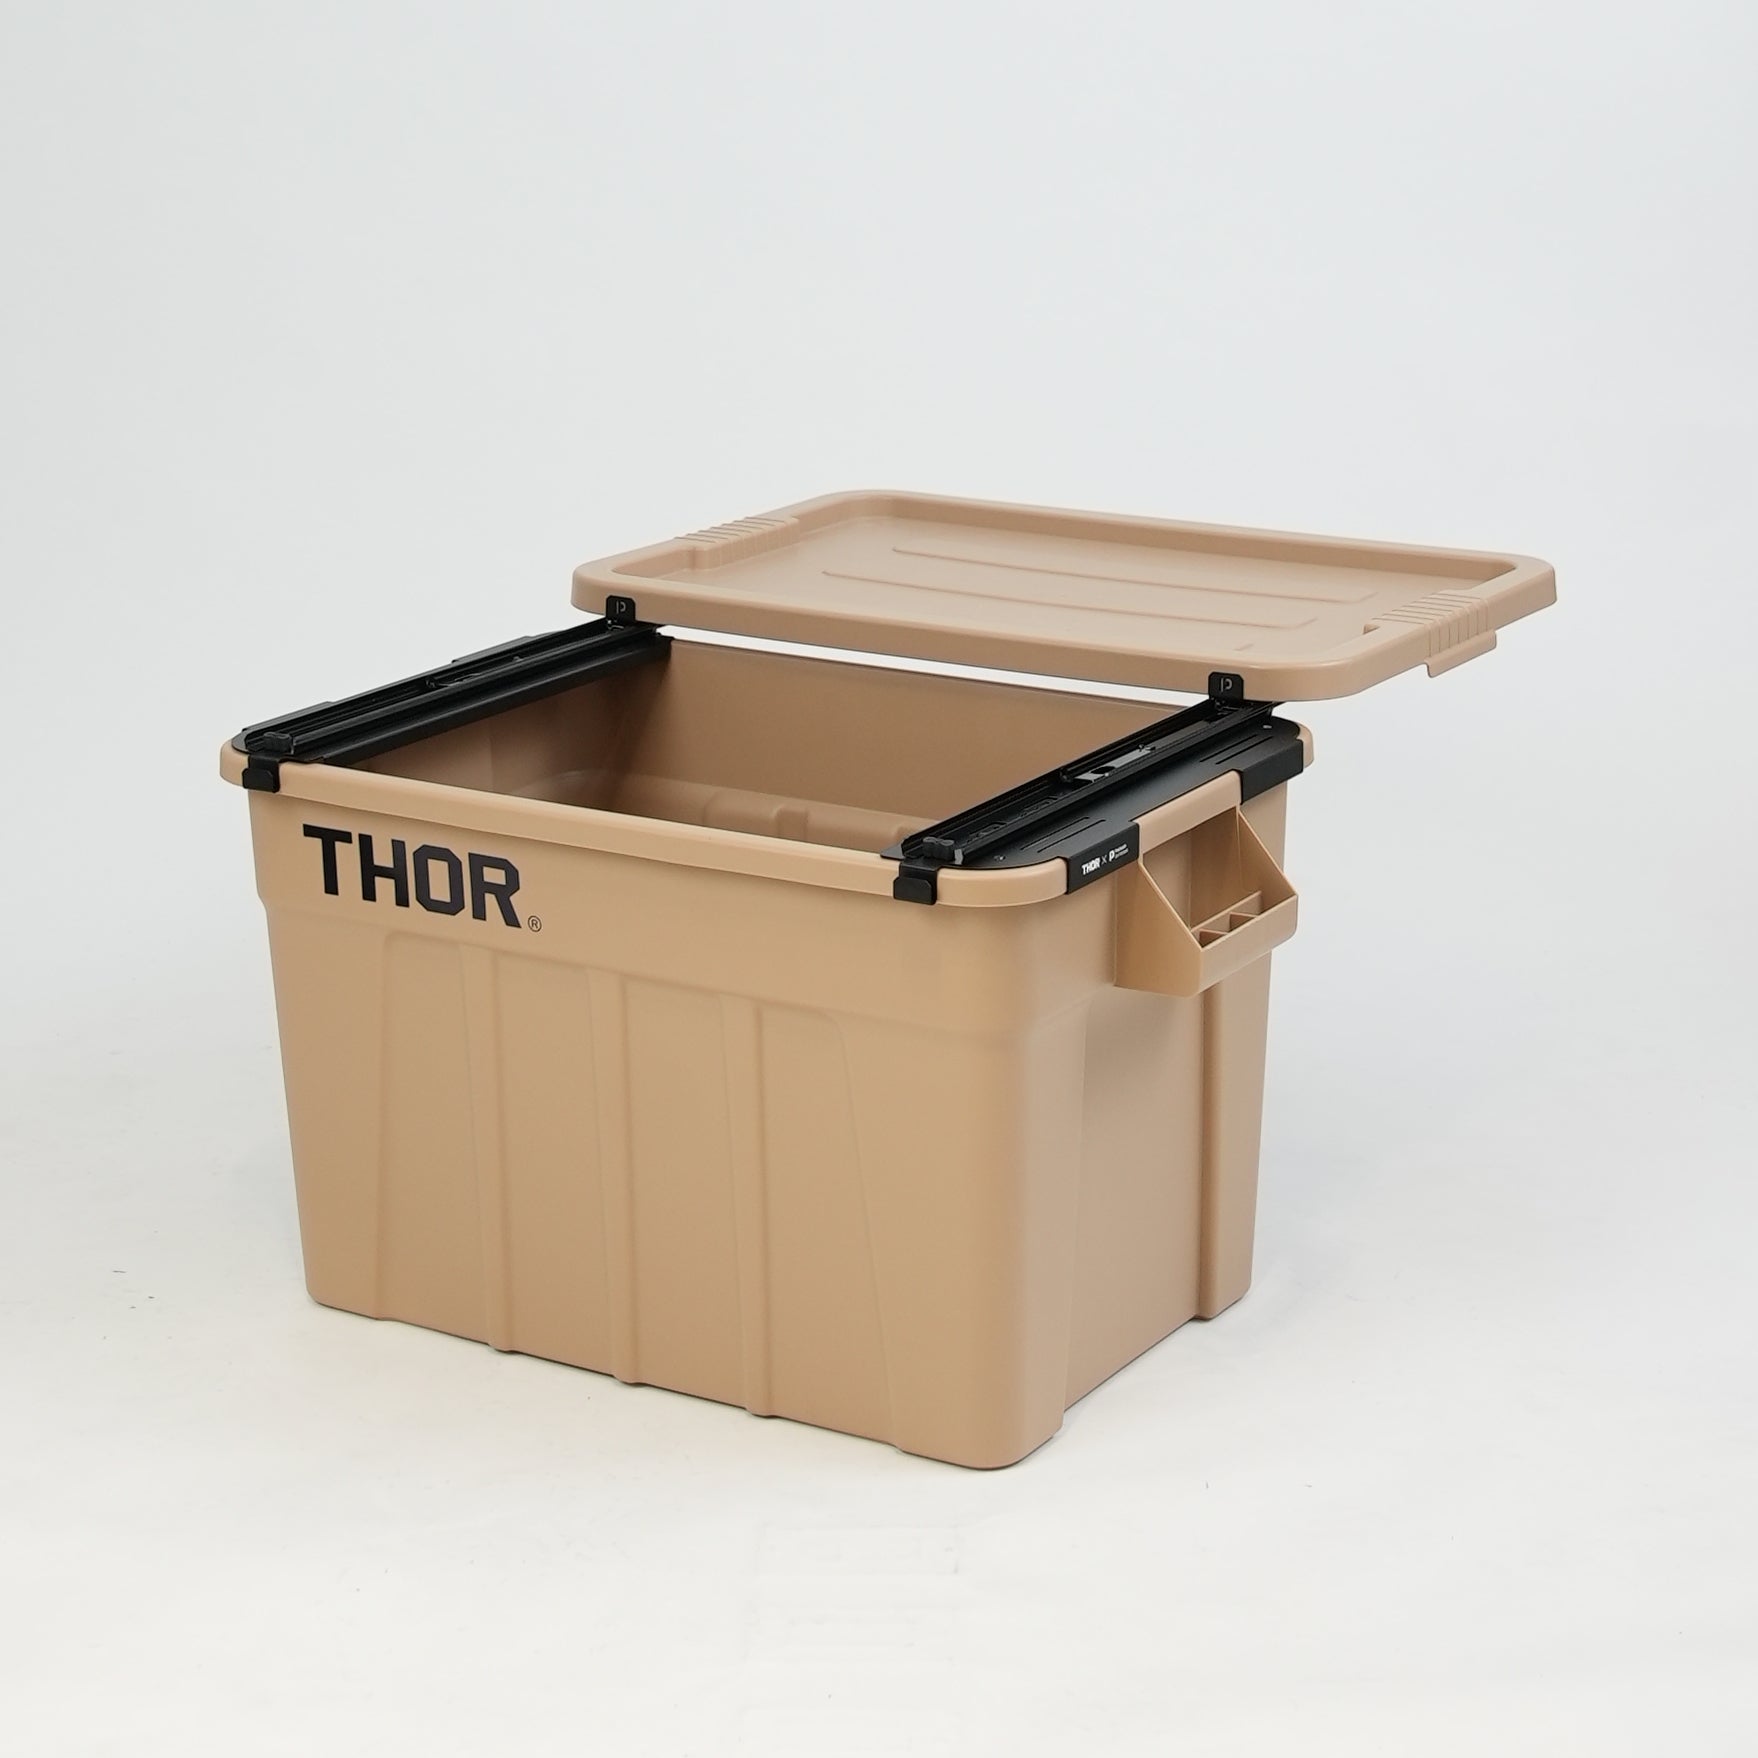 PACKUP OUTDOOR ✕ THOR 官方聯名滑軌 TH-03 Dolly［ 移山 ］適用於53L/75L